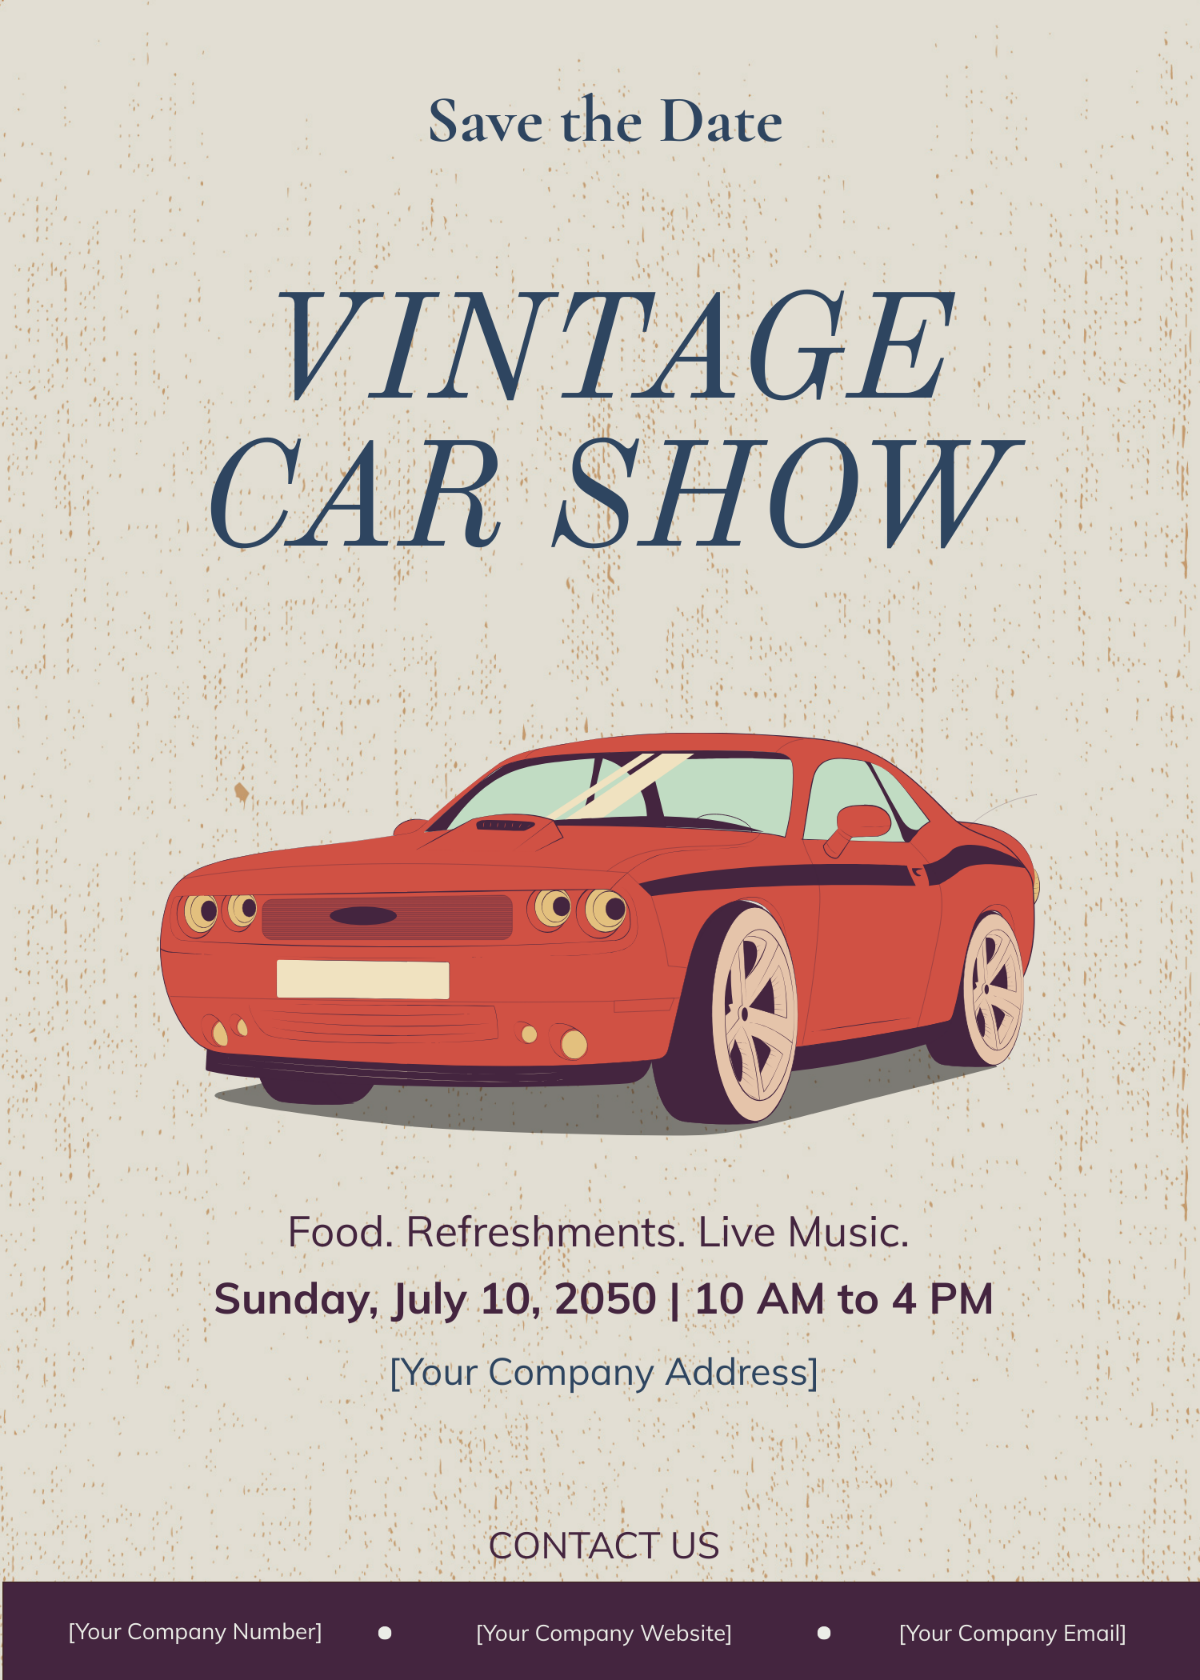 Save the Date Car Show Flyer